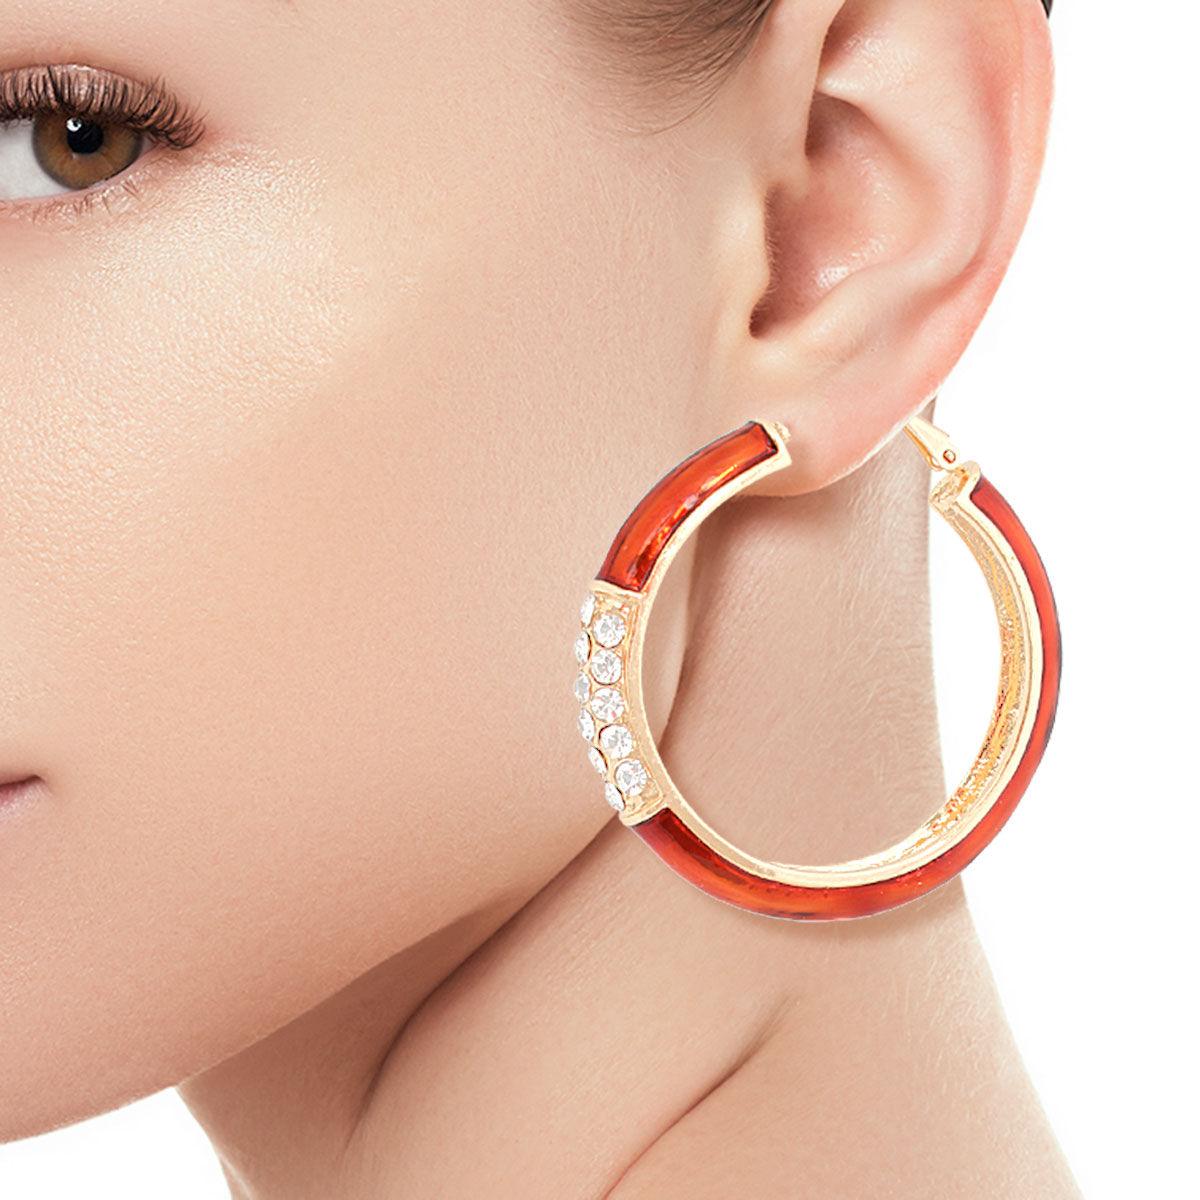 Burgundy and Gold Rhinestone Hoop Earrings: Your New Go-To Accessory